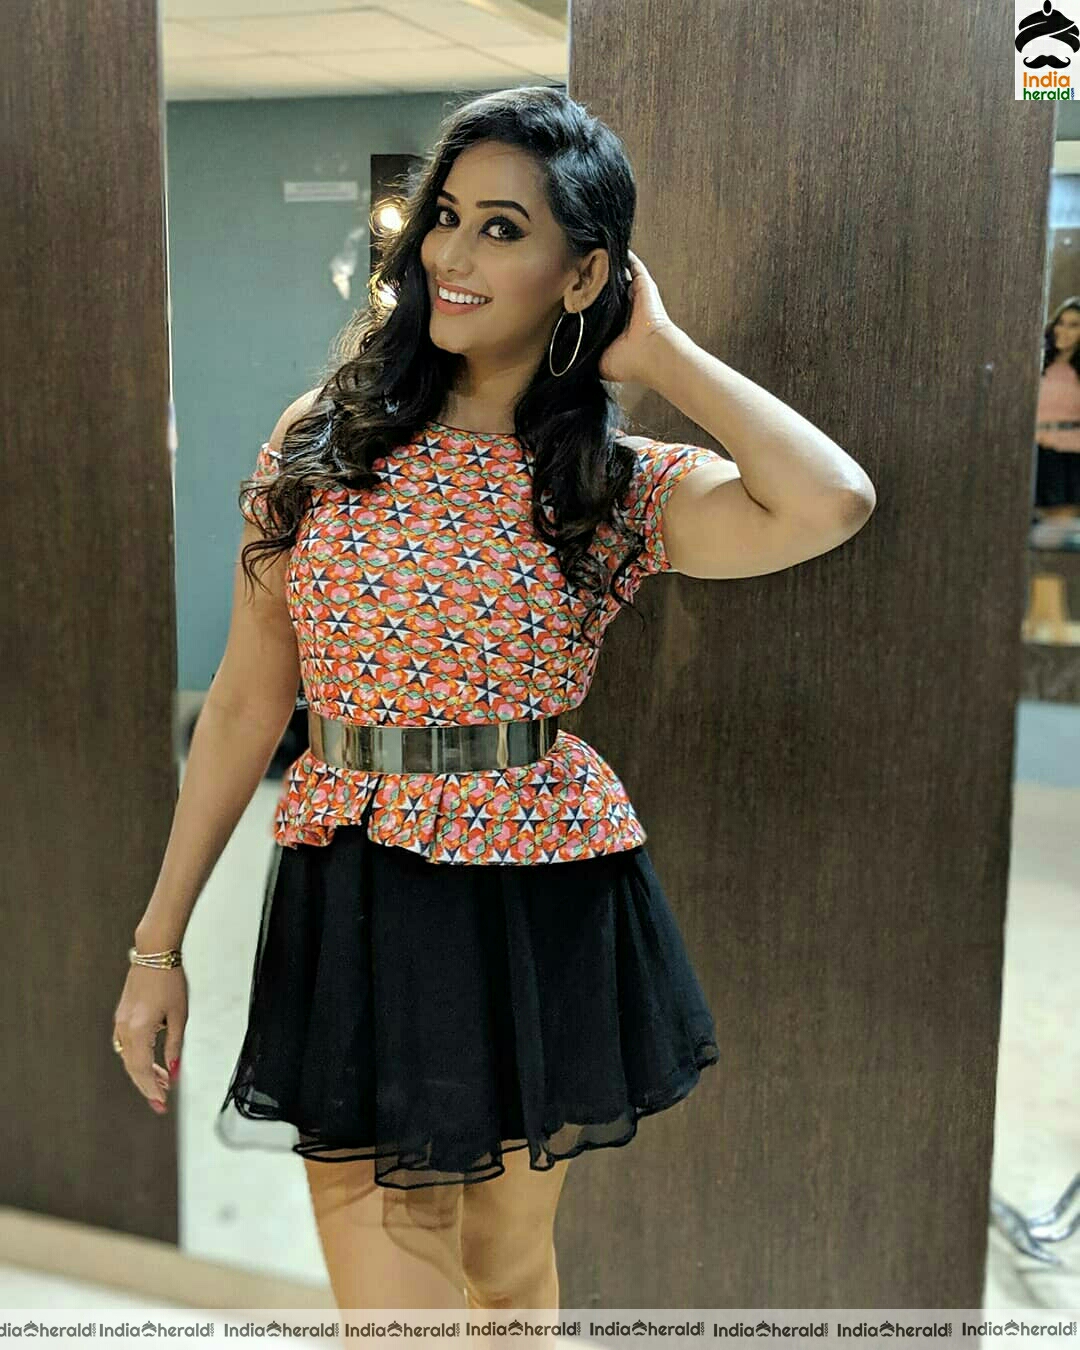 Sanjana Singh Shows Her Hot Thighs In These Latest Short Frock Stills